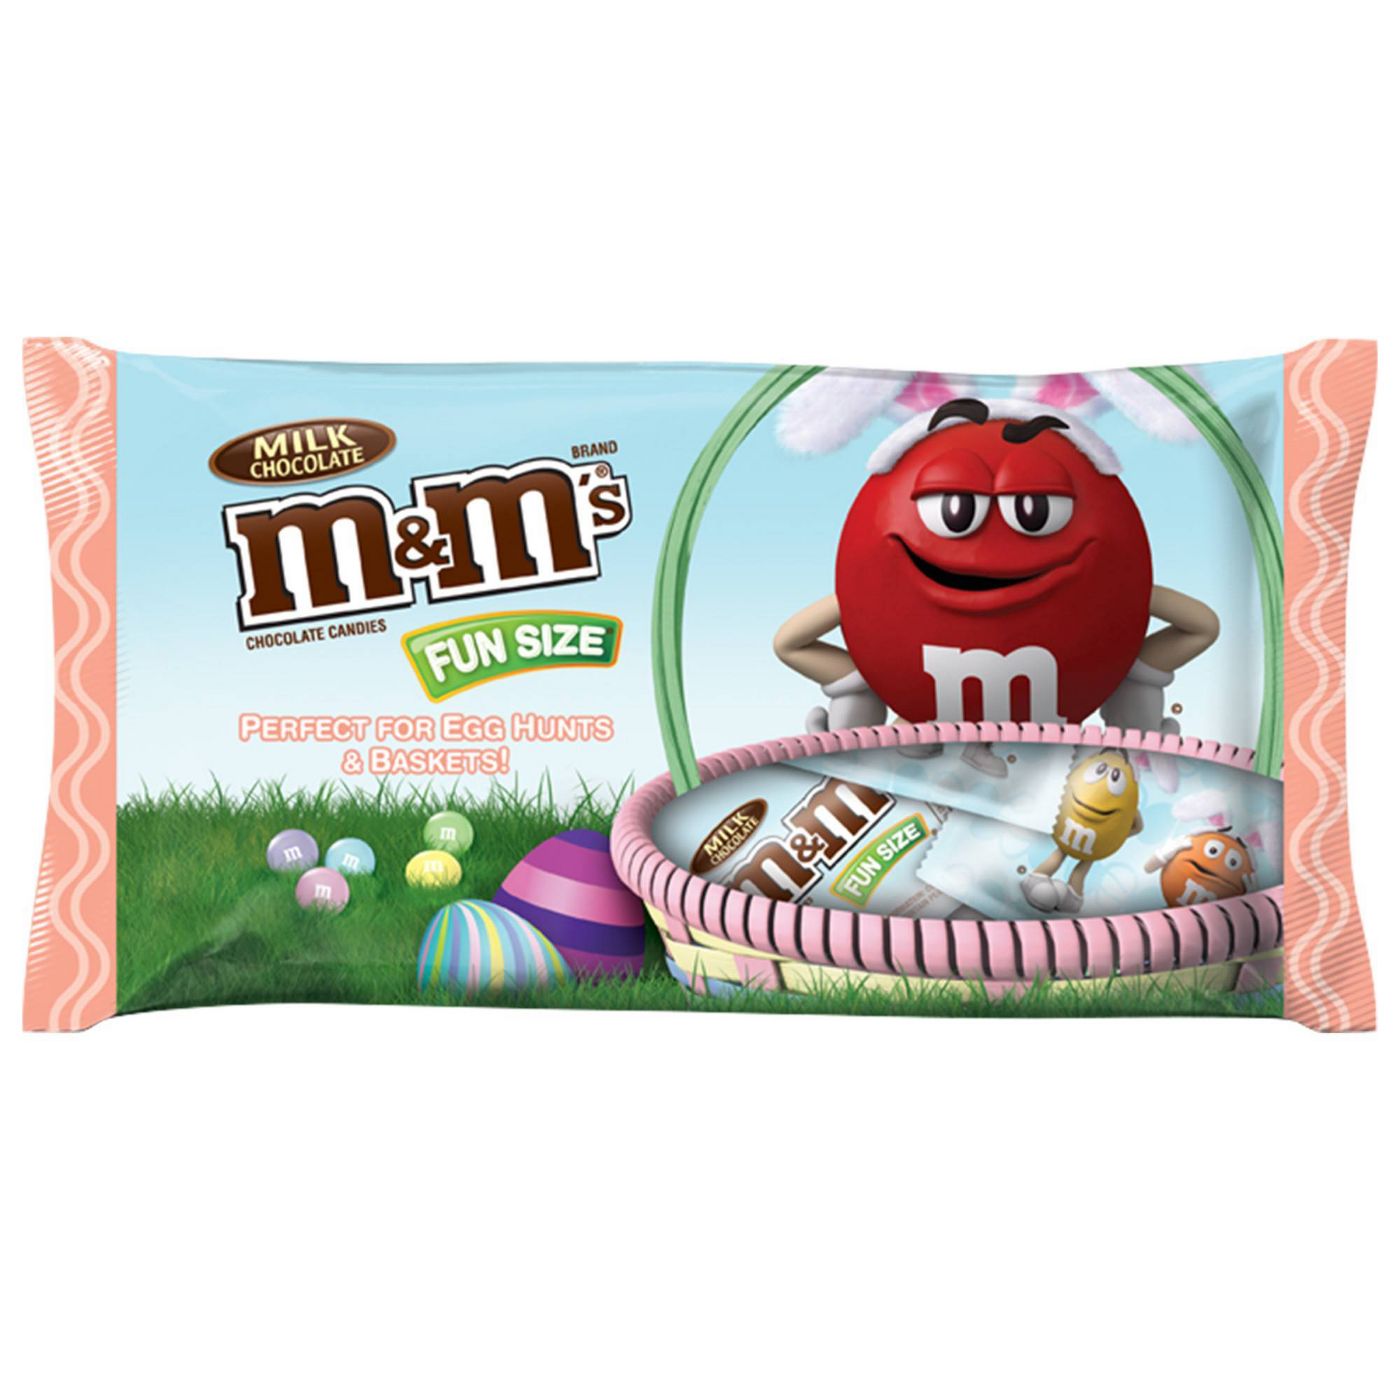 M&M's Pastel Mix Easter Milk Chocolate Candy - 10 oz Bag - DroneUp